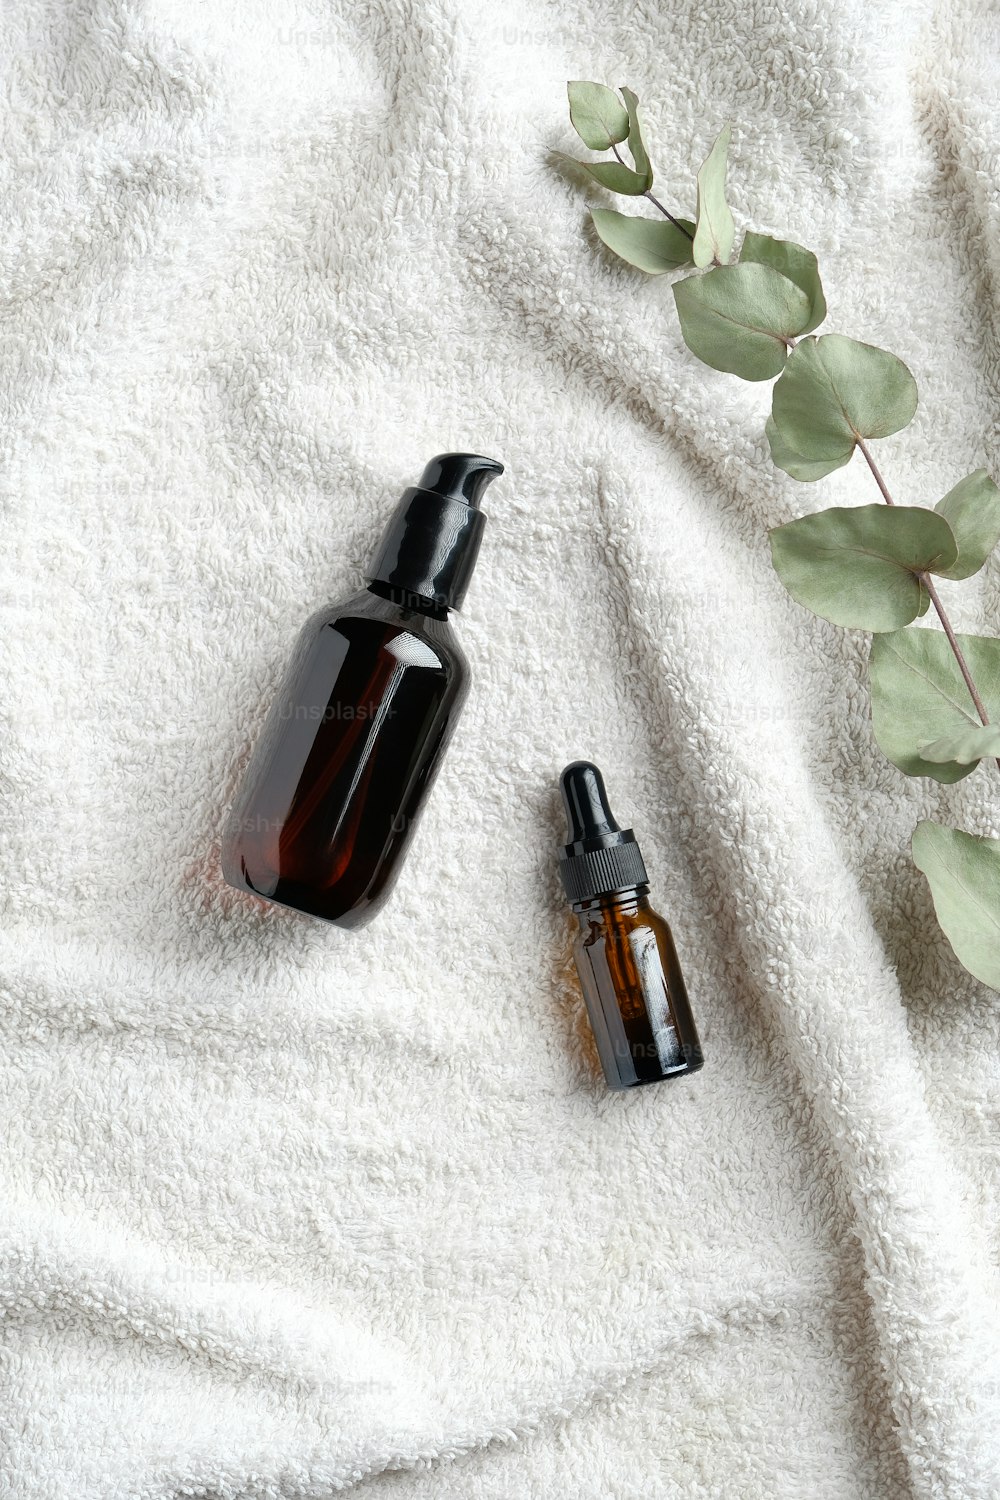 SPA natural organic cosmetics set. Serum and essential oil with eucalyptus leaf on white towel in bathroom. Flat lay, top view.